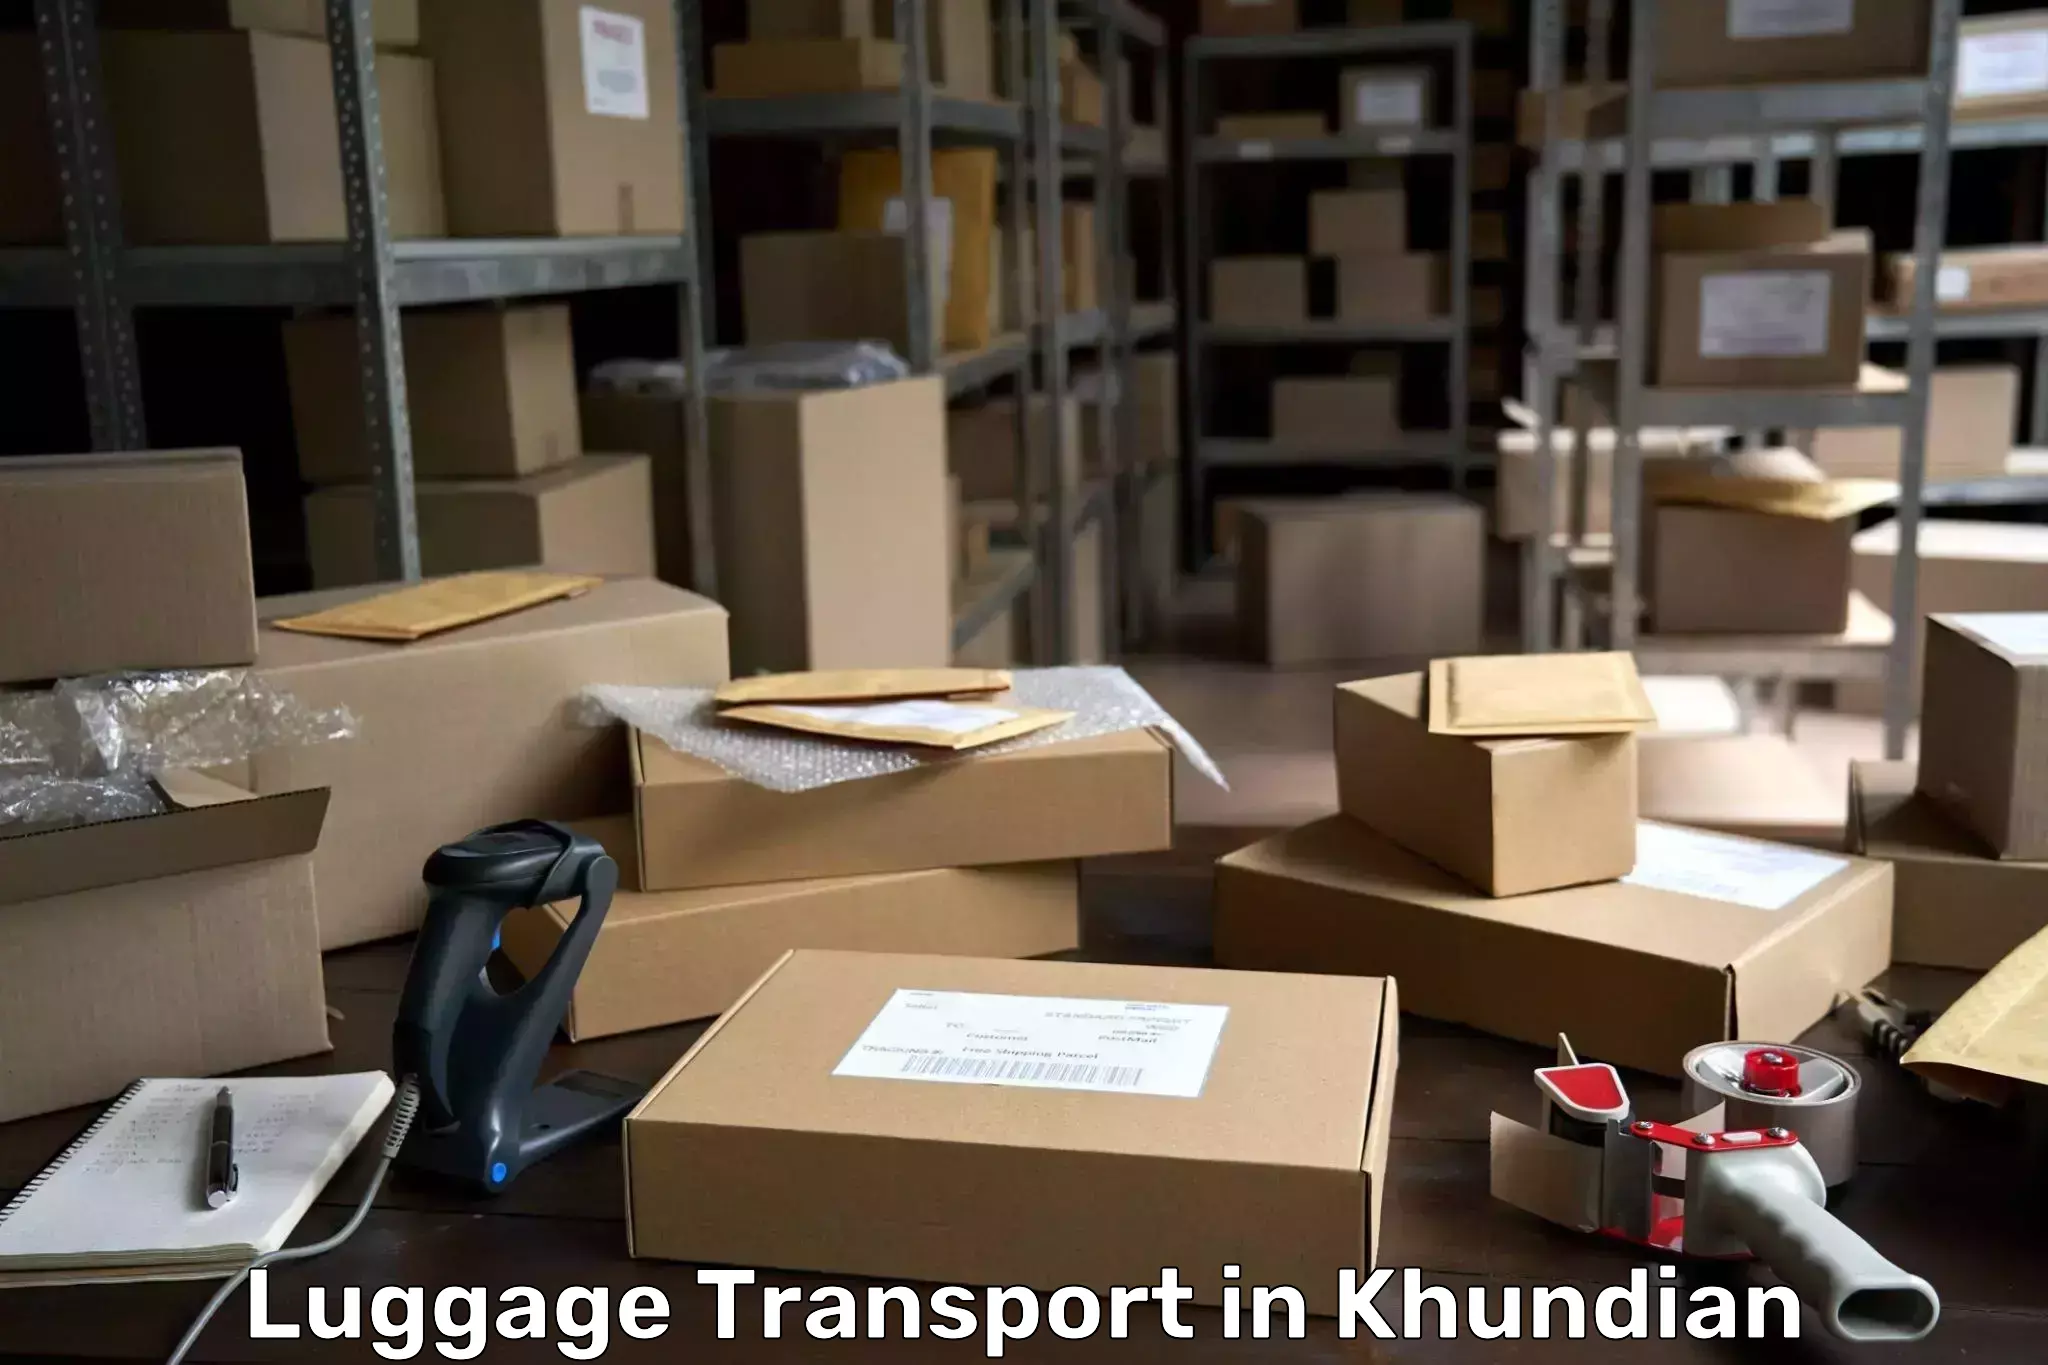 Excess baggage transport in Khundian